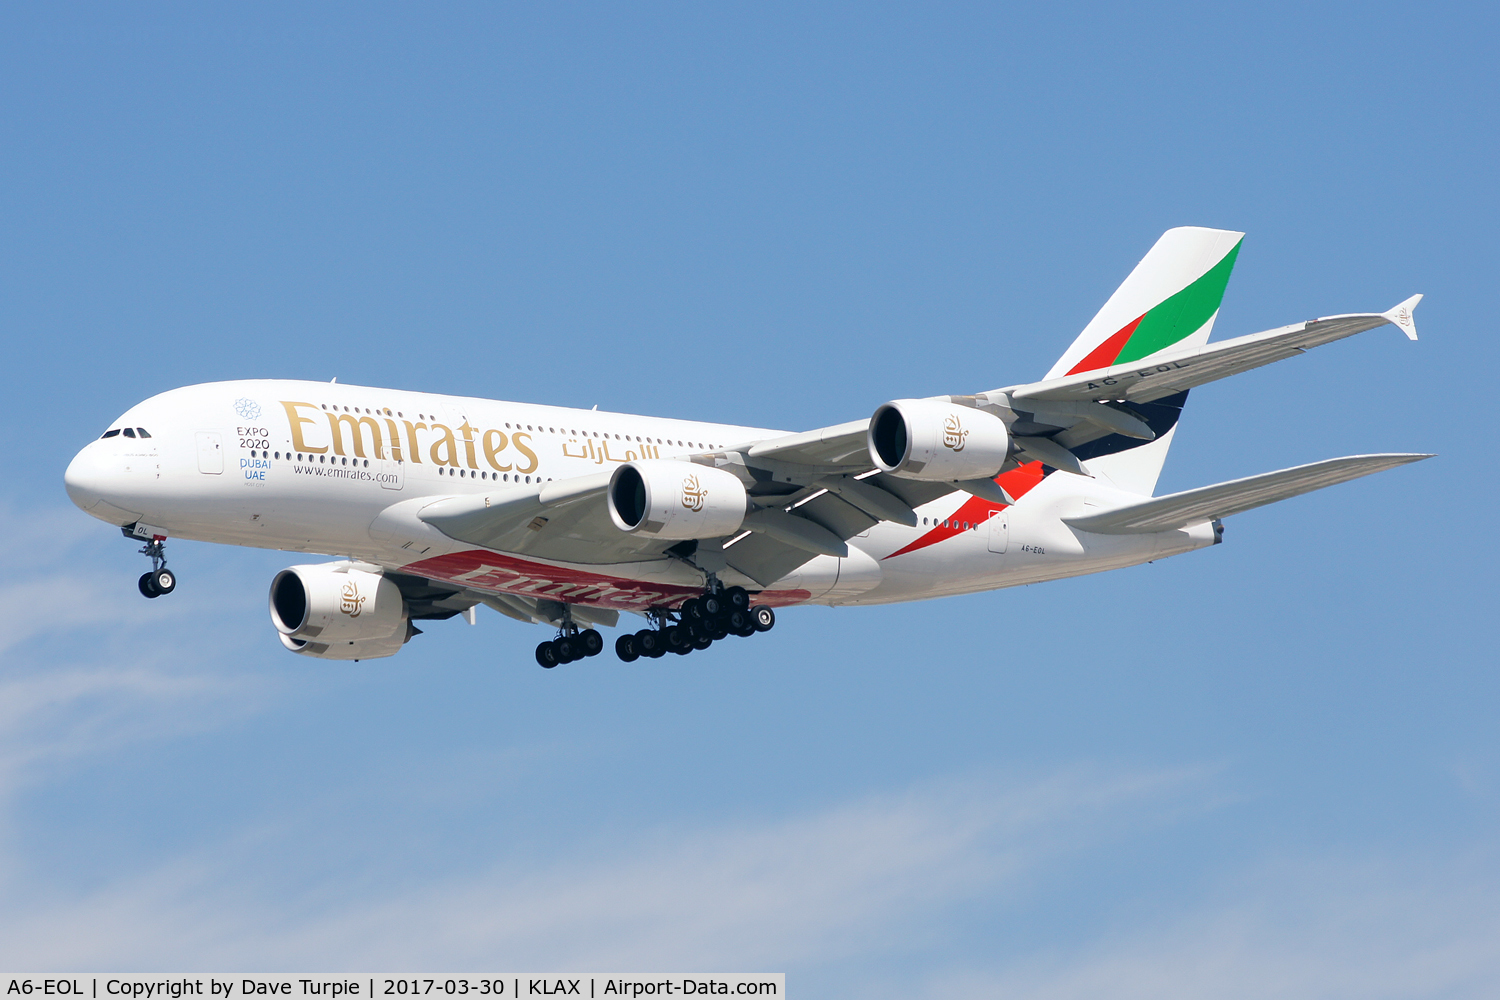 A6-EOL, 2015 Airbus A380-861 C/N 186, No comment.